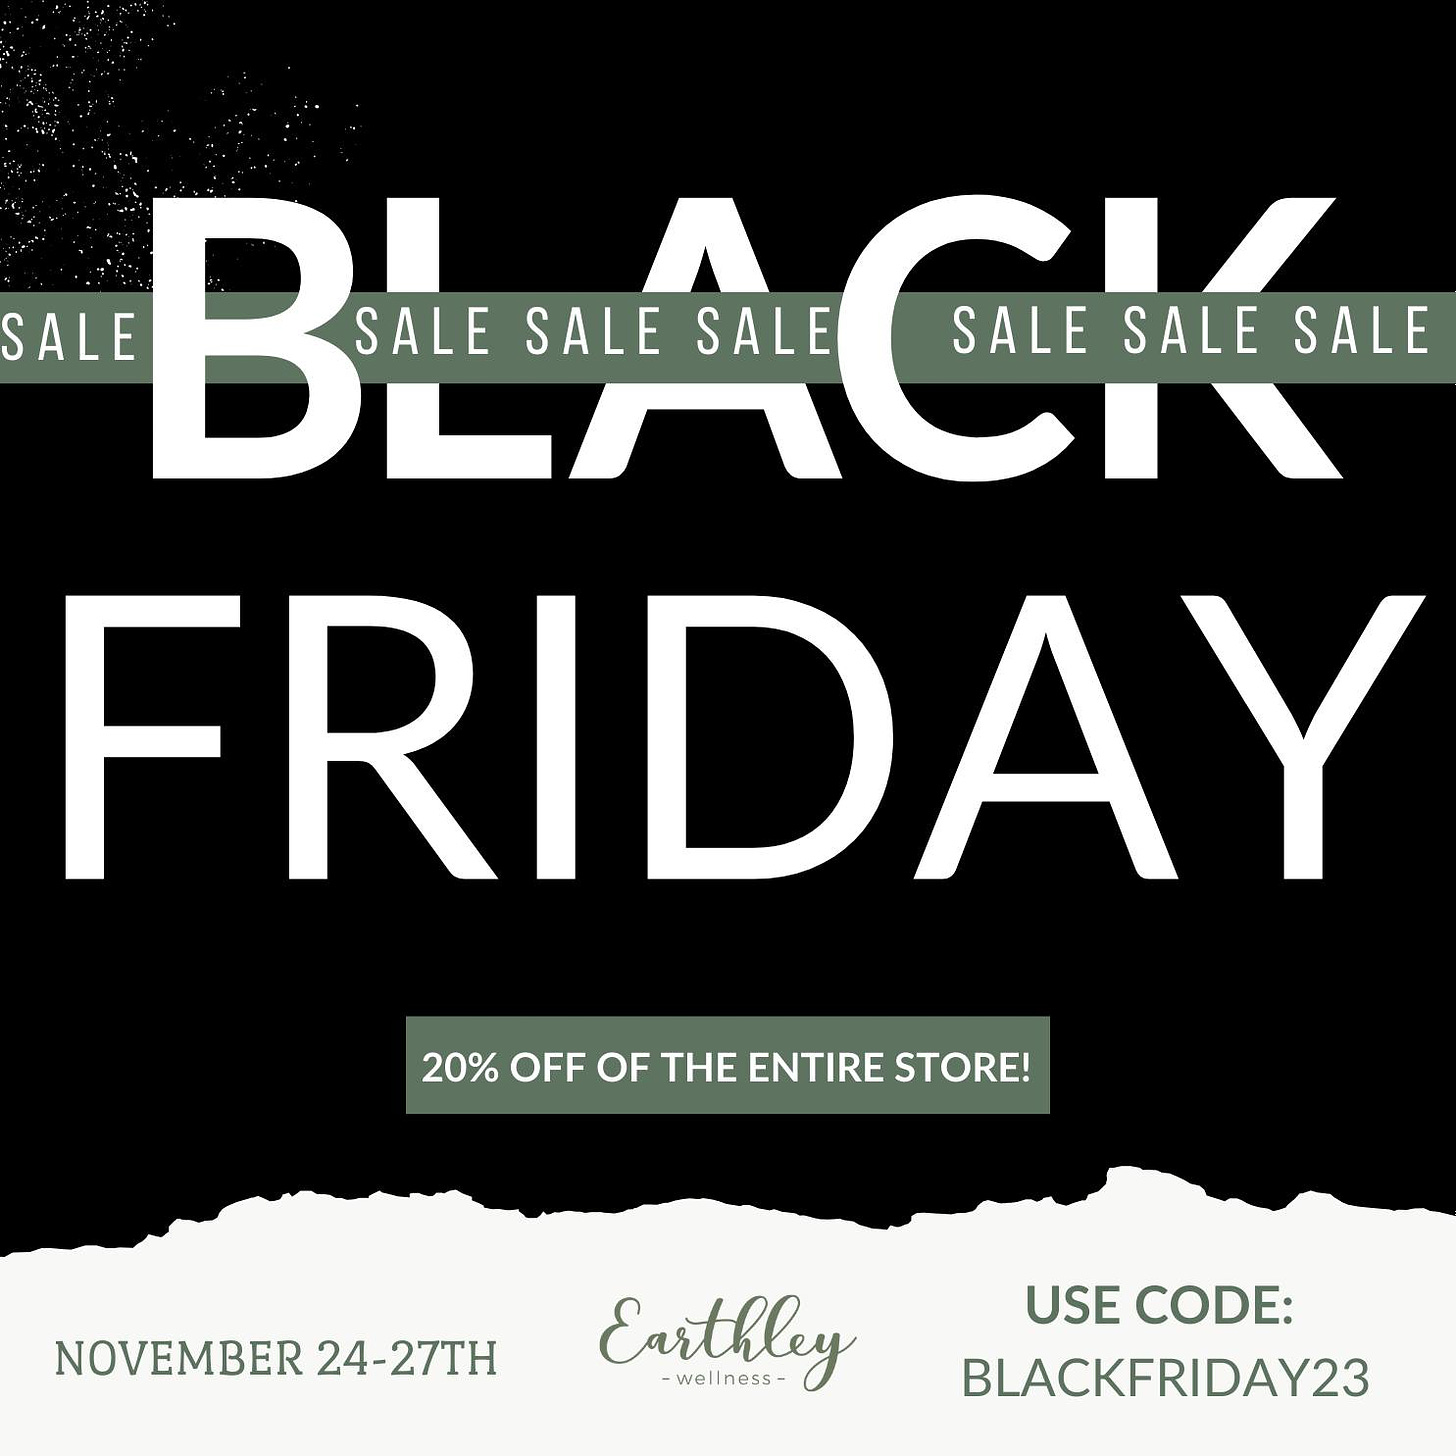 May be an image of text that says 'SALE BEAC B. DEACA BL SALE SALE SALE SALE SALE SALE ERIDAY 20% OFF OF THE ENTIRE STORE! NOVEMBER 24-27TH Earthley ness- USE CODE: BLACKFRIDAY23'